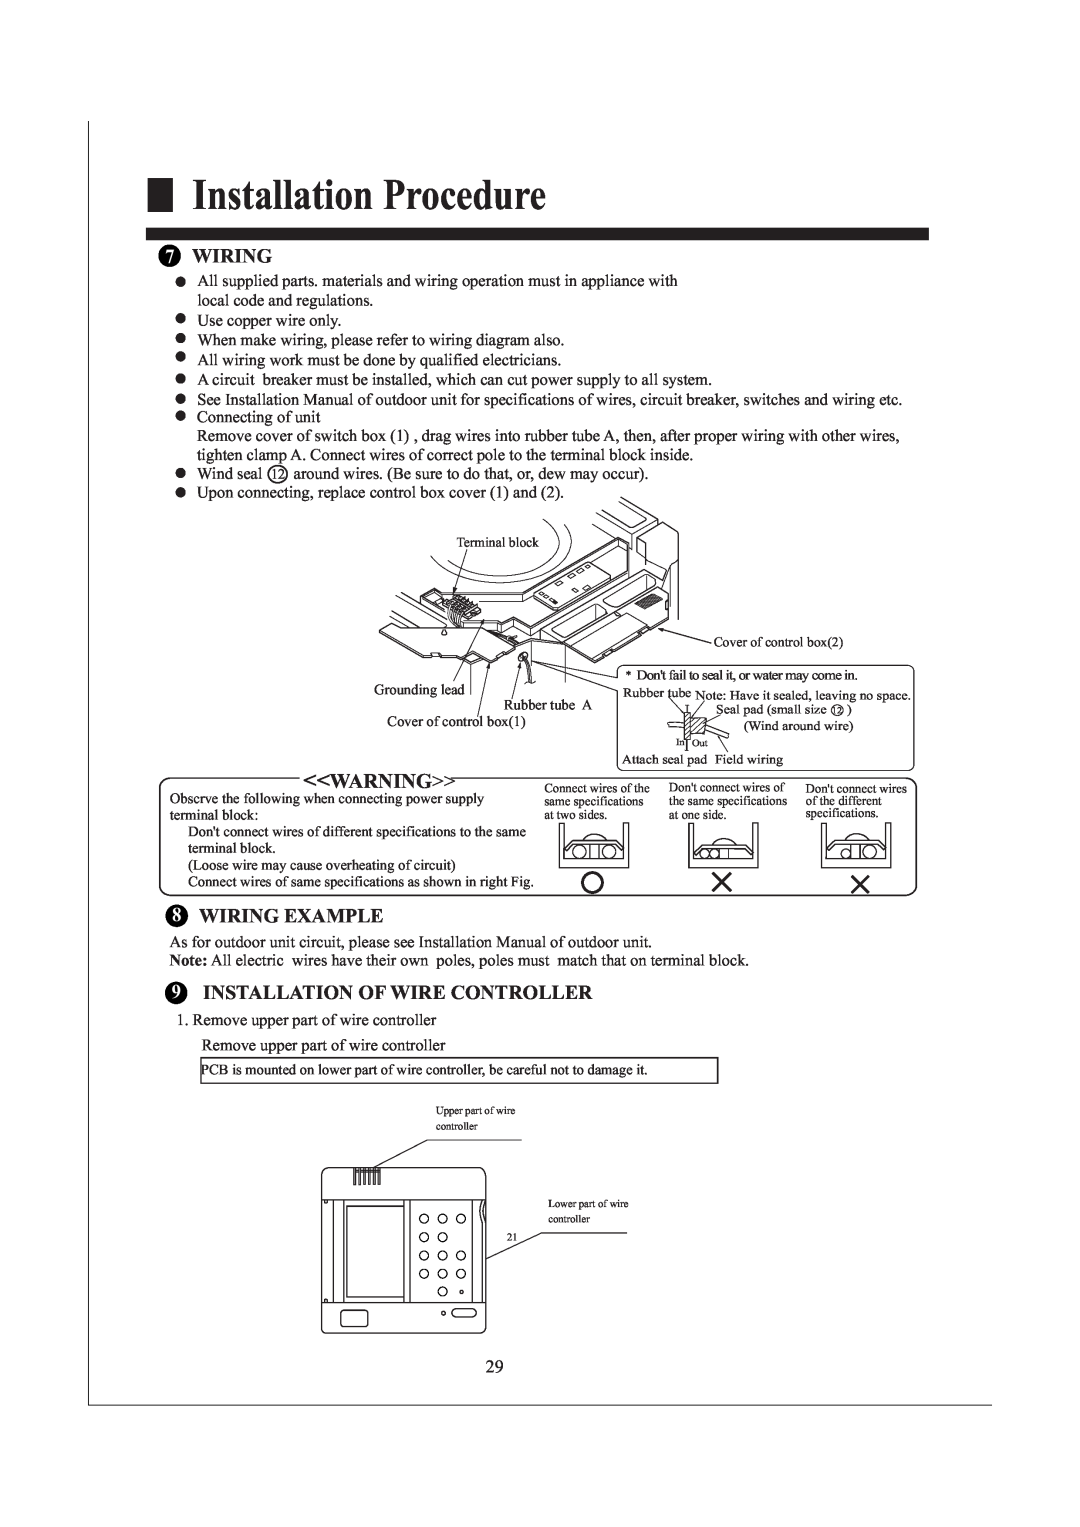 Haier AB242XCAAA operation manual Installation Procedure, Wiring Example, 9INSTALLATION OF WIRE CONTROLLER 